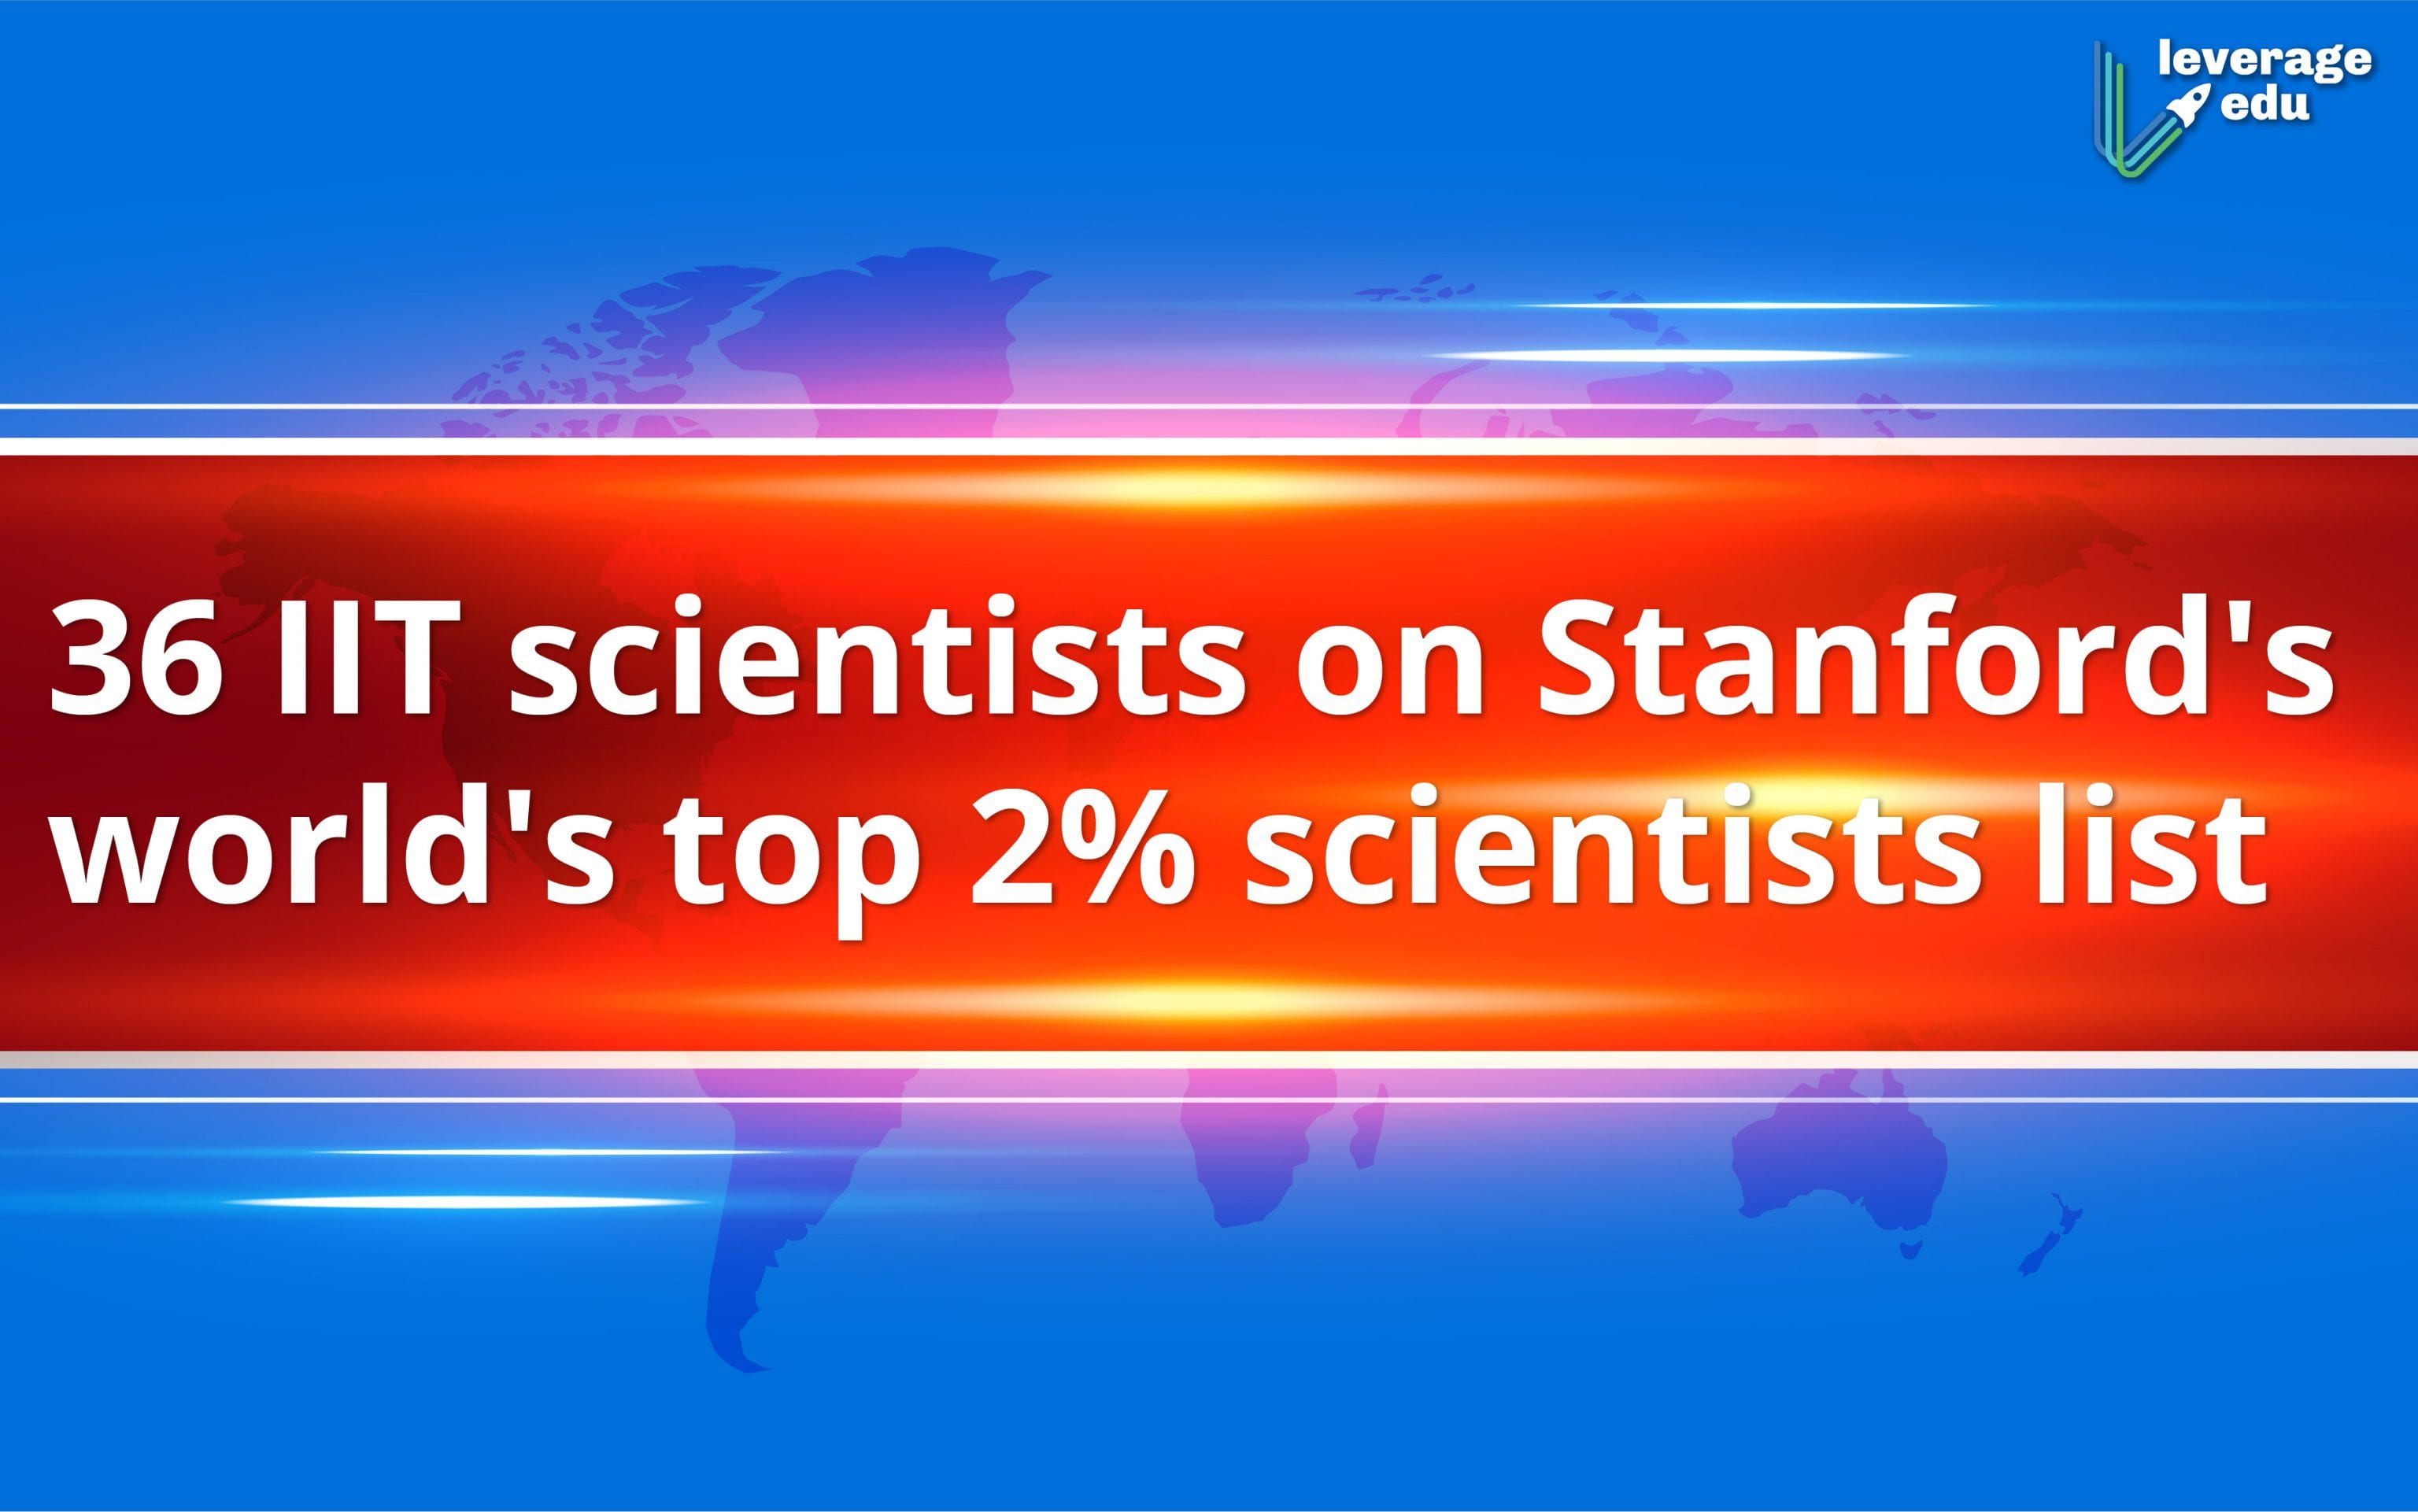 These IIT Scientists are Featured in Stanford's World's Top 2